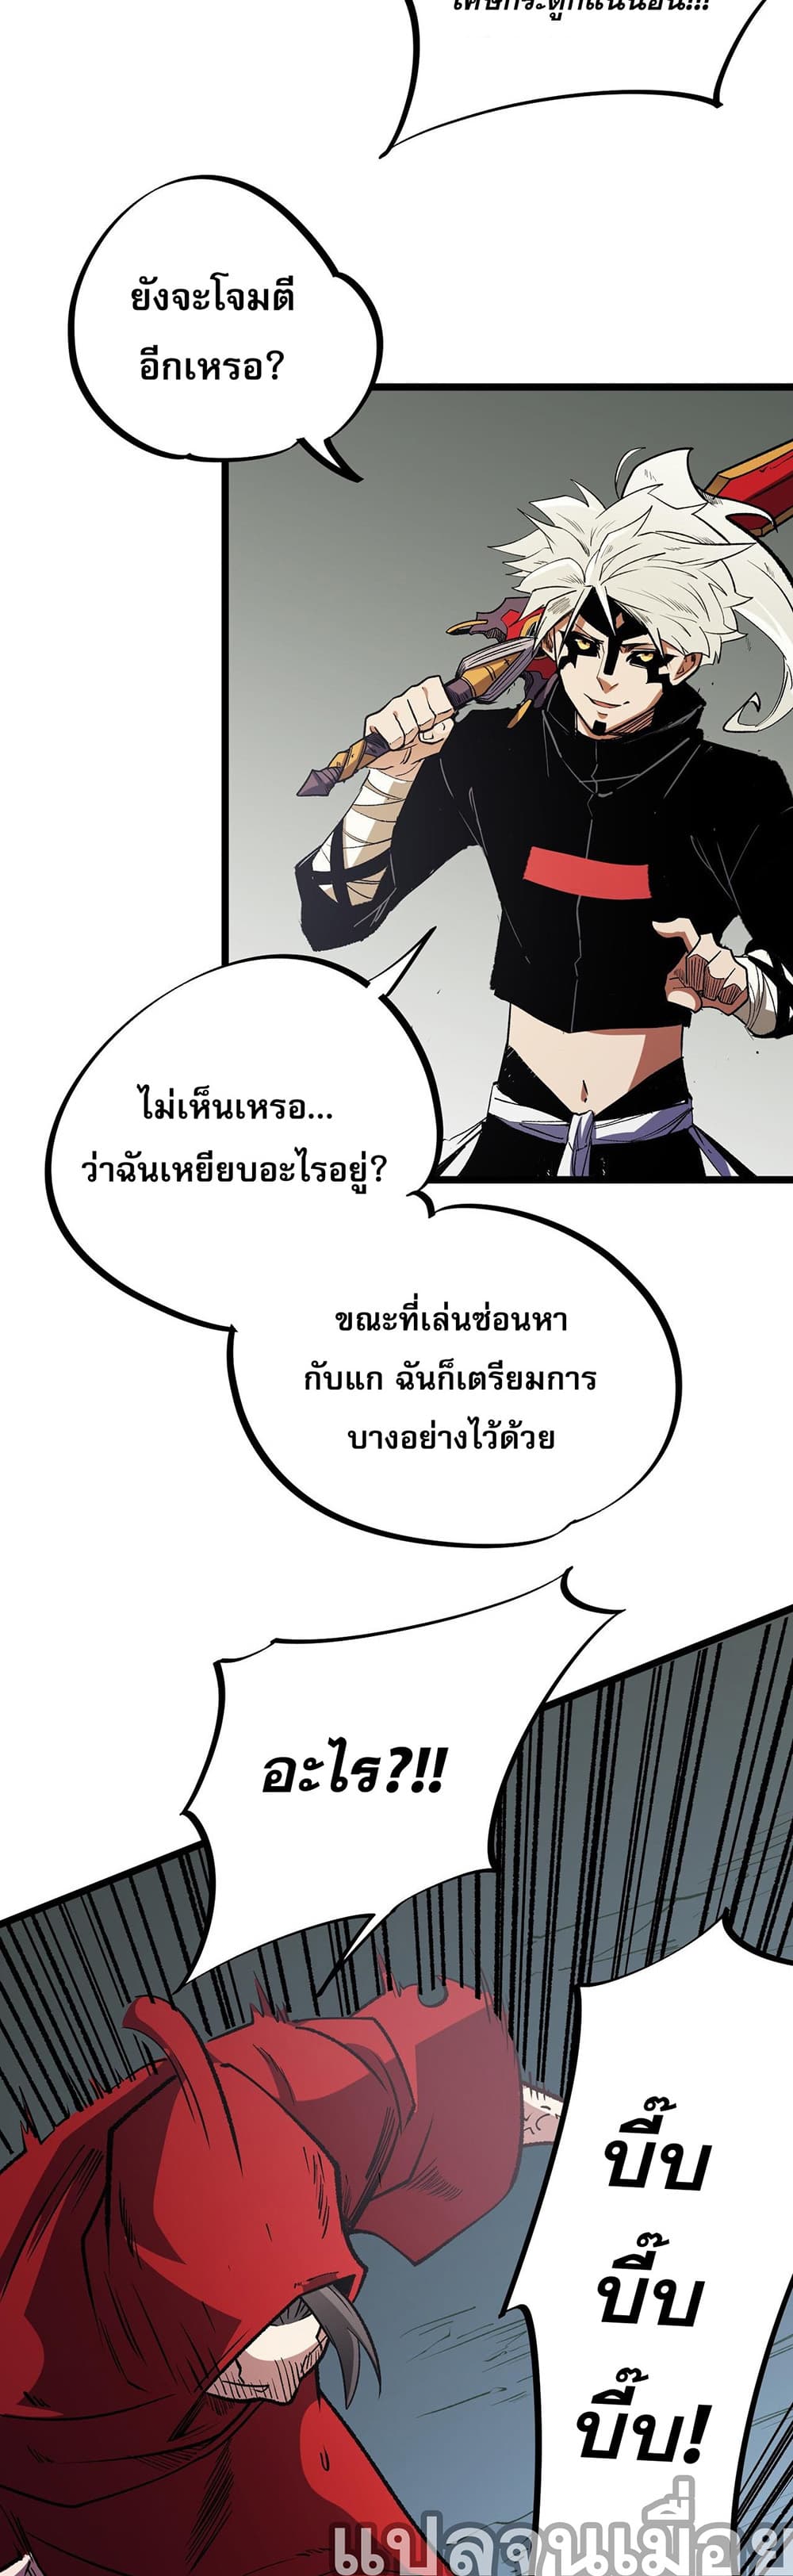 Job Changing for the Entire Population: The Jobless Me Will Terminate the Gods ฉันคือผู้เล่นไร้อาชีพที่สังหารเหล่าเทพ 43-43